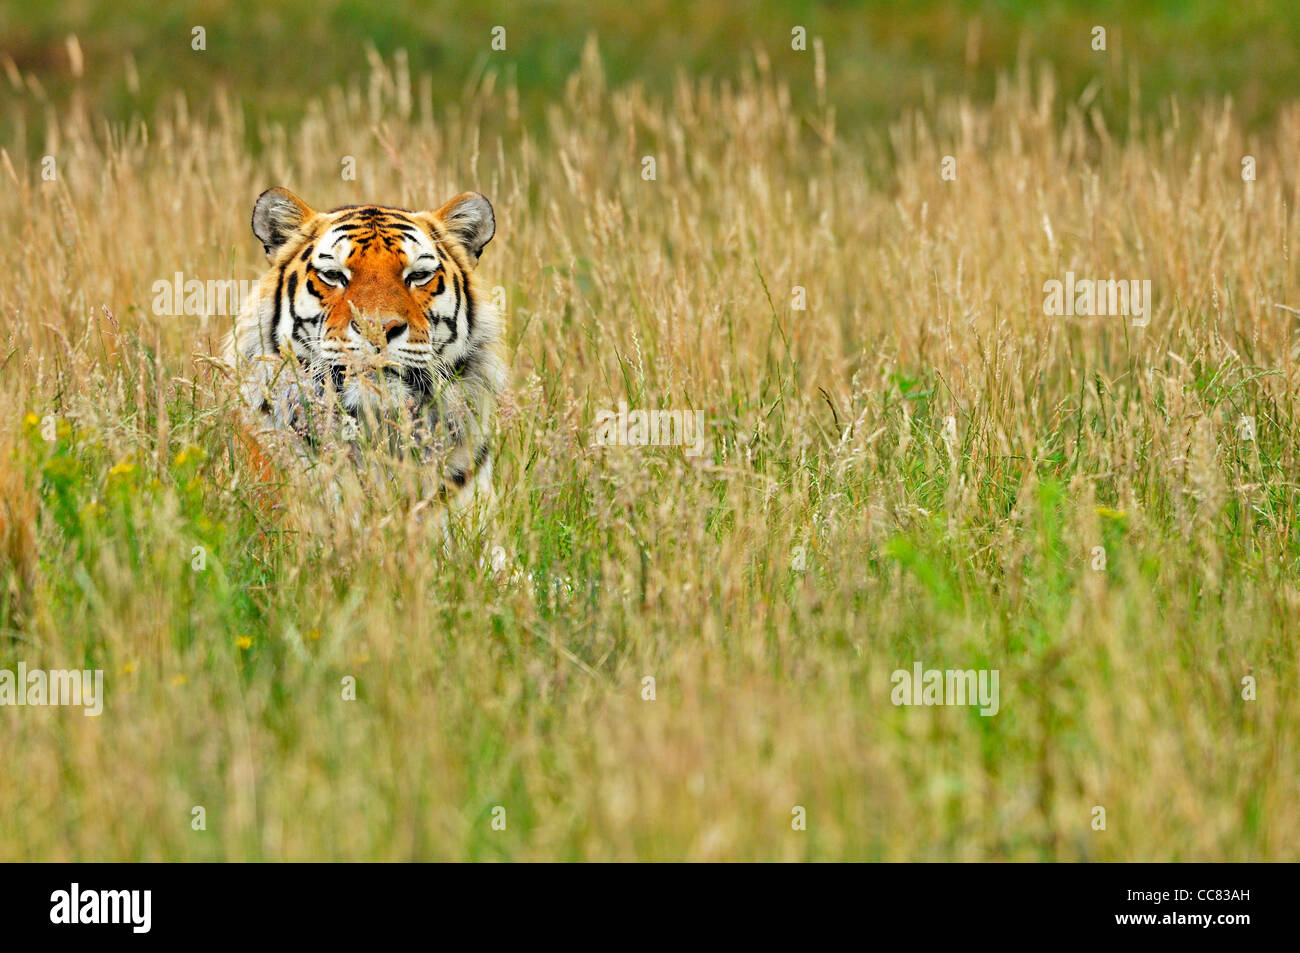 Siberian tiger / Amur tiger (Panthera tigris altaica) hidden in tall grass, native to Russia and China Stock Photo